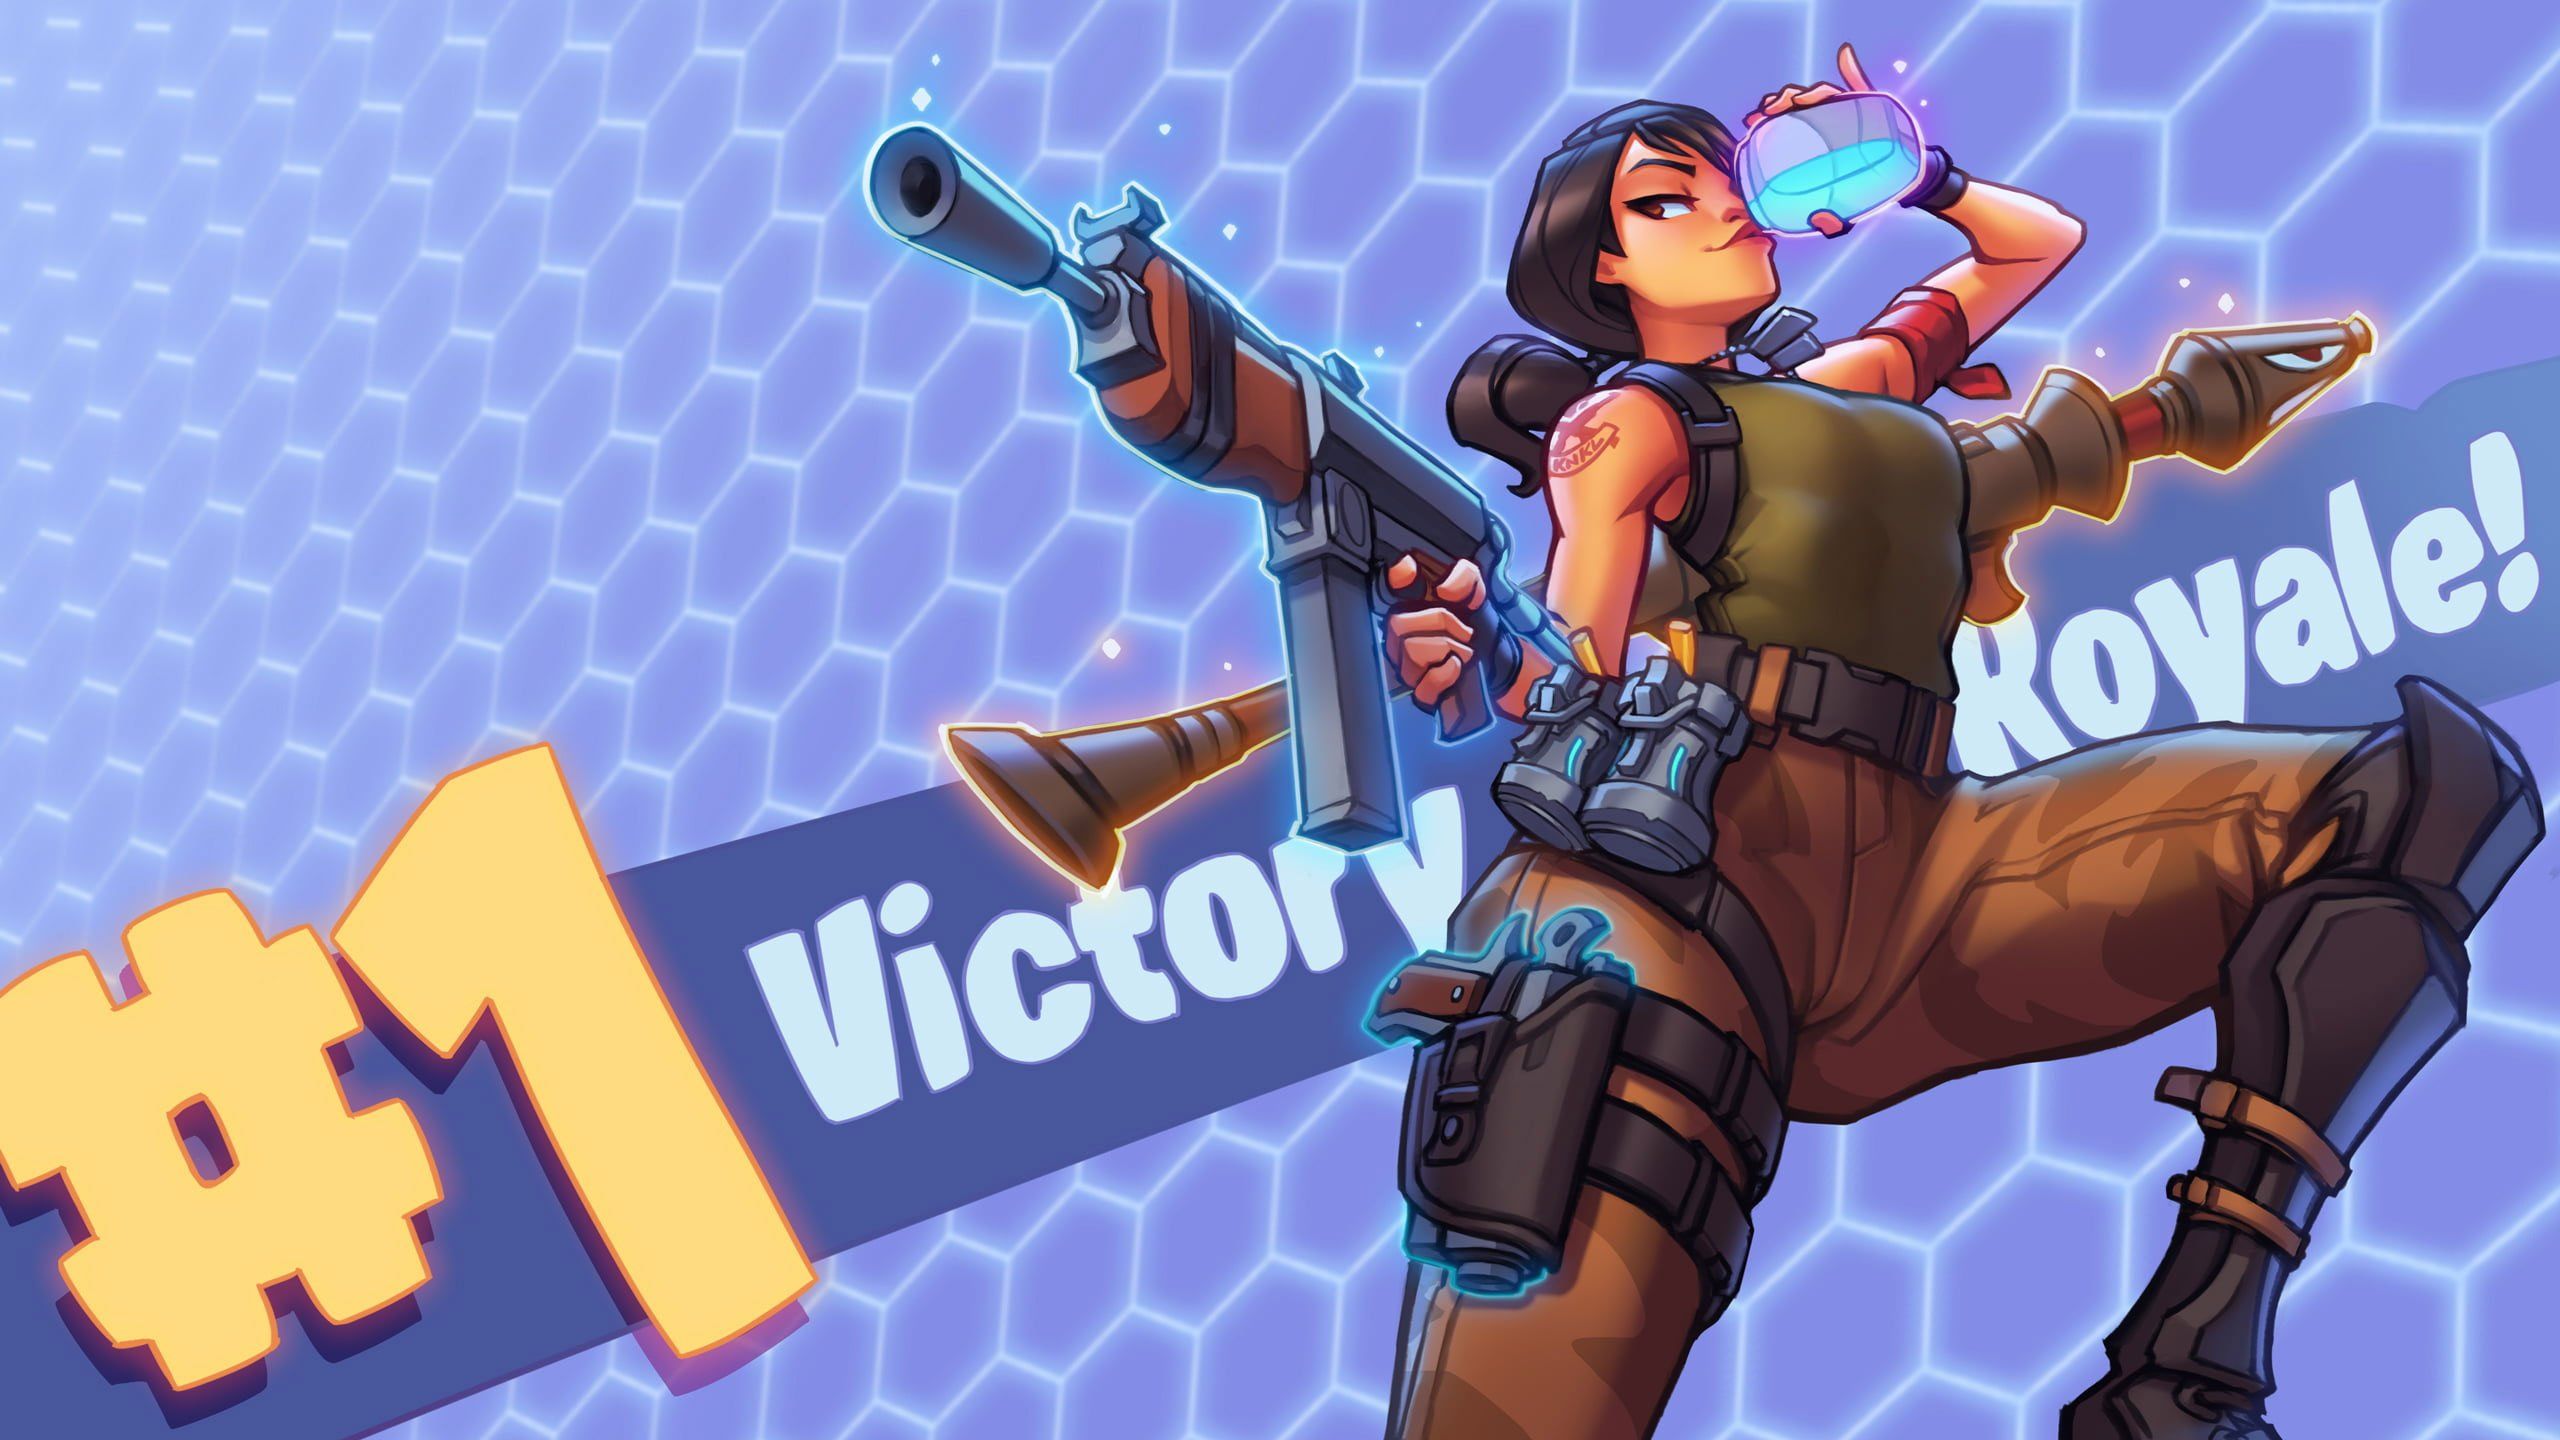 Fortnite Wallpaper Character Illustration, Battle Royale, Video Games, Video Game Characters